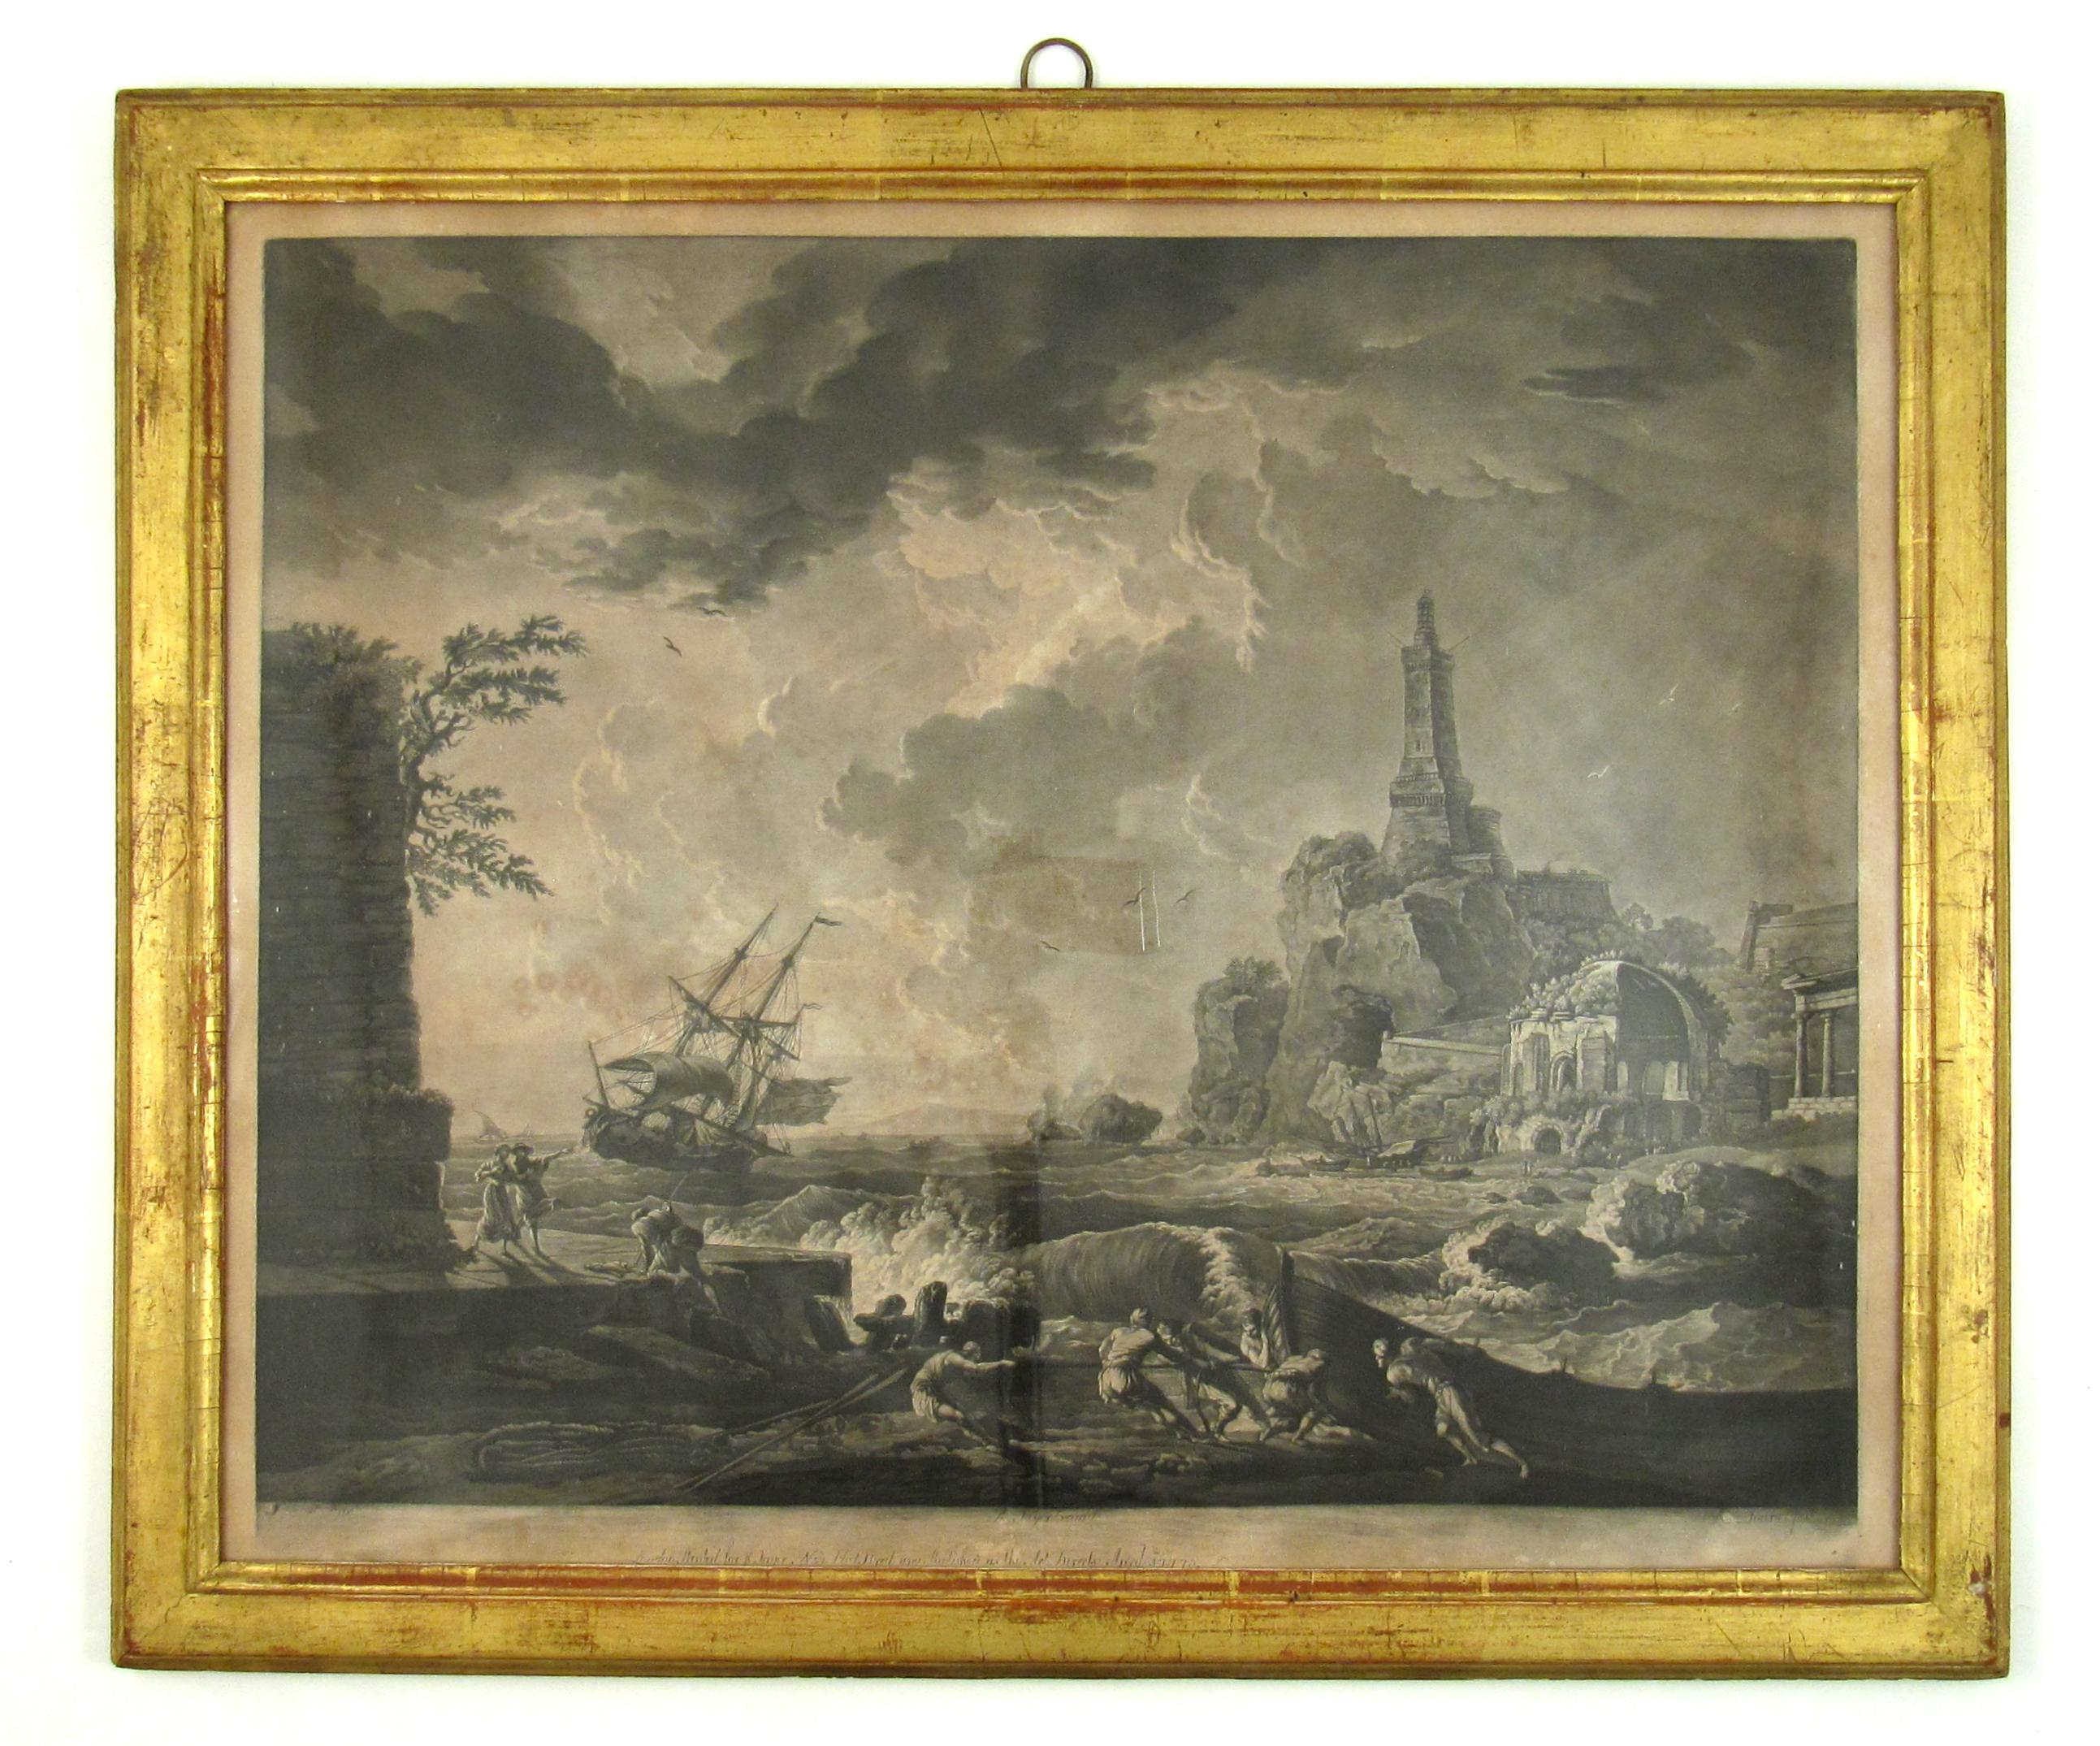 Costal Harbour Landscape with a Ship and brewing Storm - 18th Century Engraving - Print by Claude-Joseph Vernet